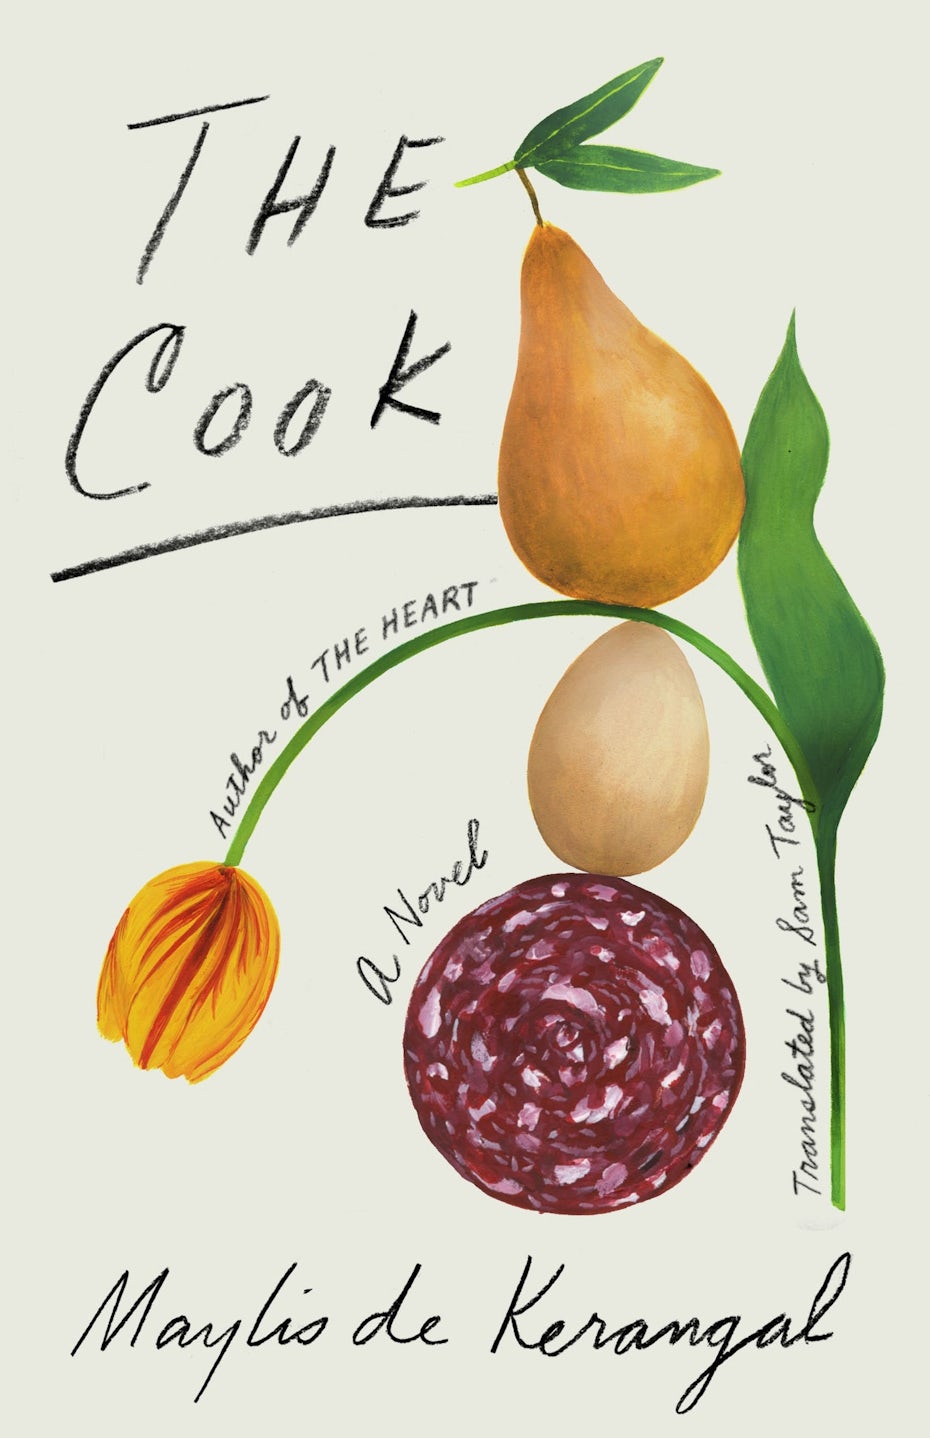 book cover trends 2020 example with handwritten pencil type and food illustratio